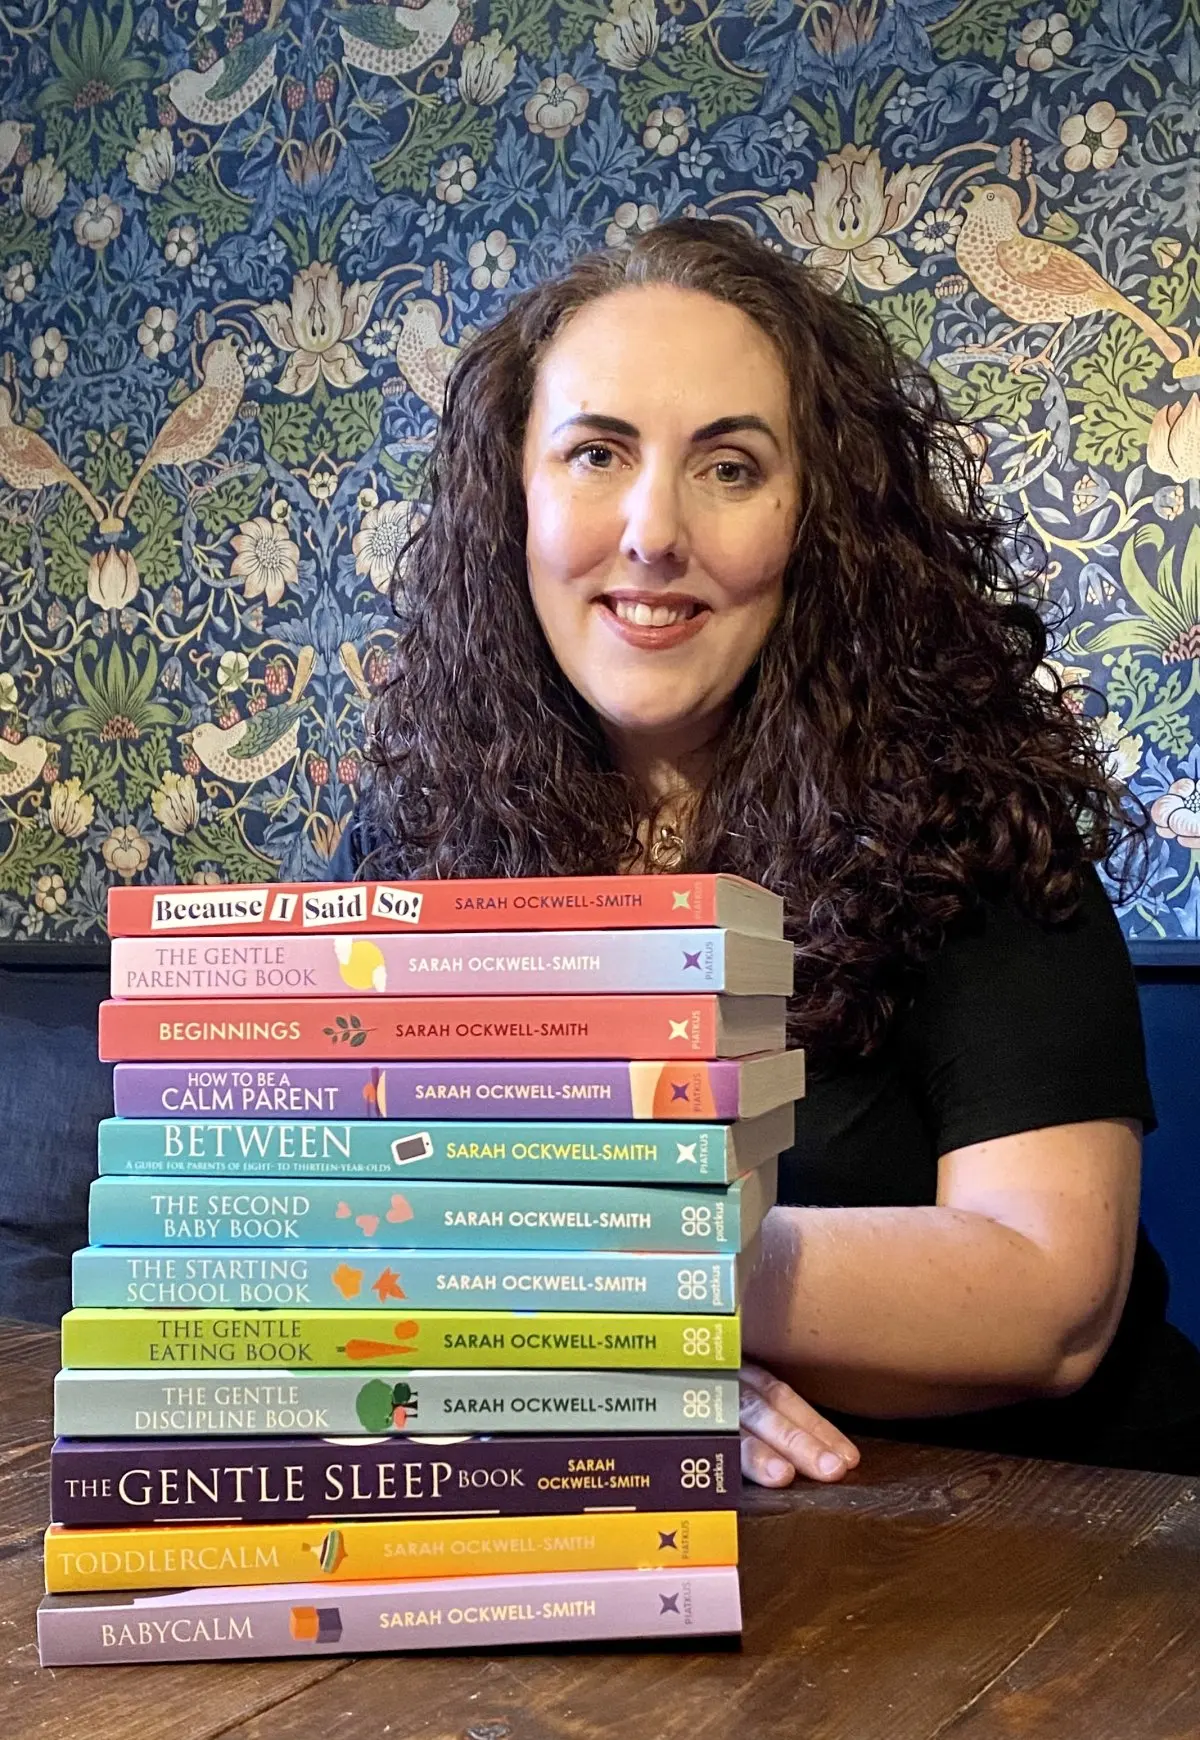 Sarah Ockwell-Smith behind her books